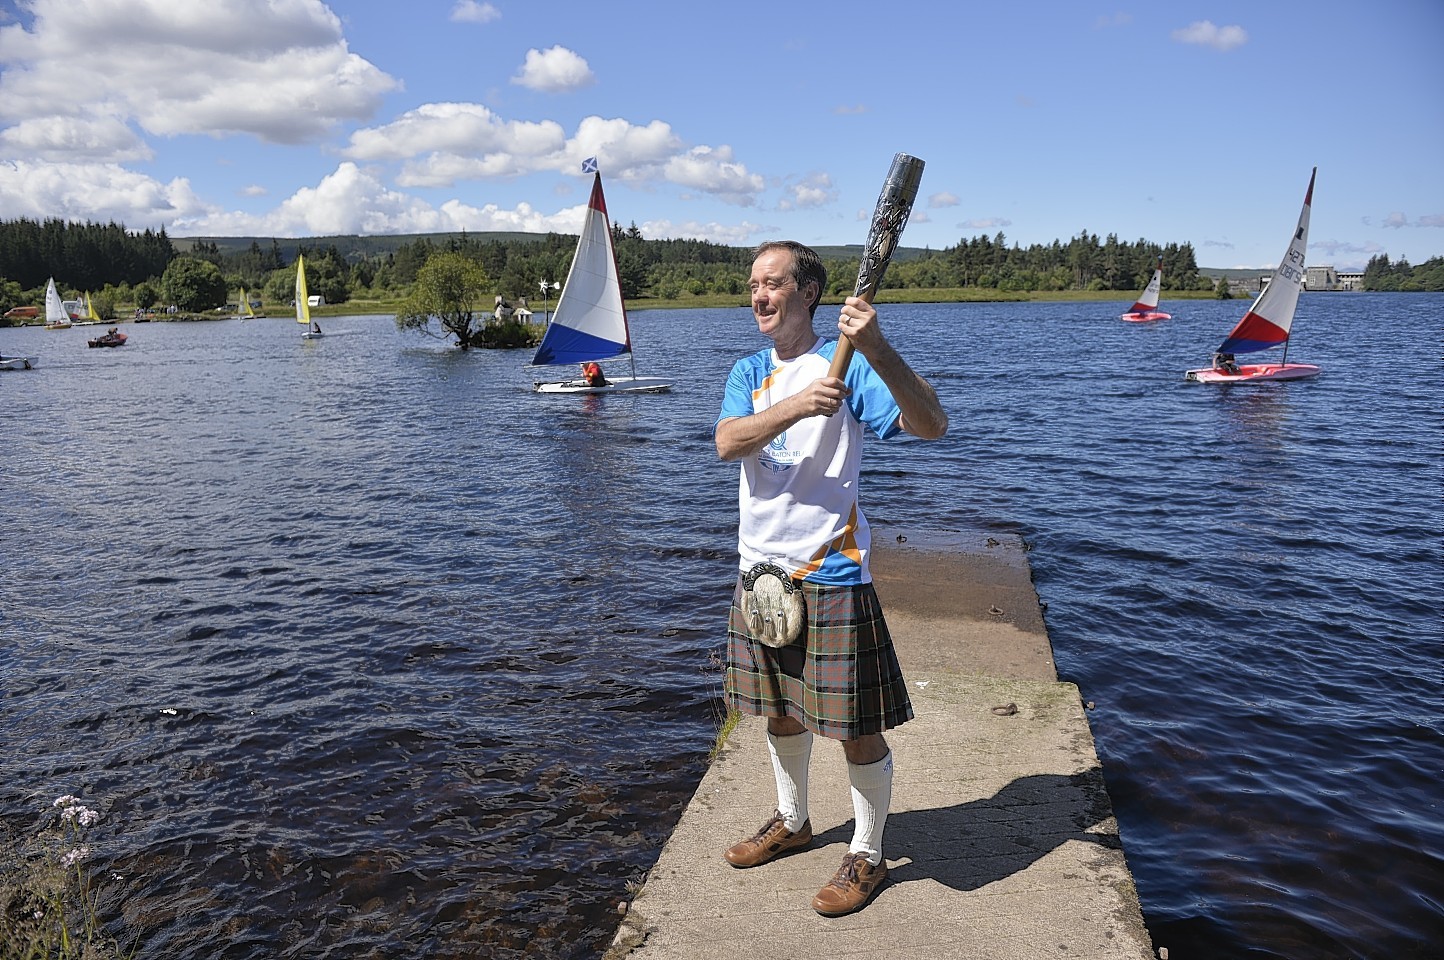 Thomas Mathieson carrying the Glasgow 2014 Queen's Baton through Lairg in the Scottish Highlands.